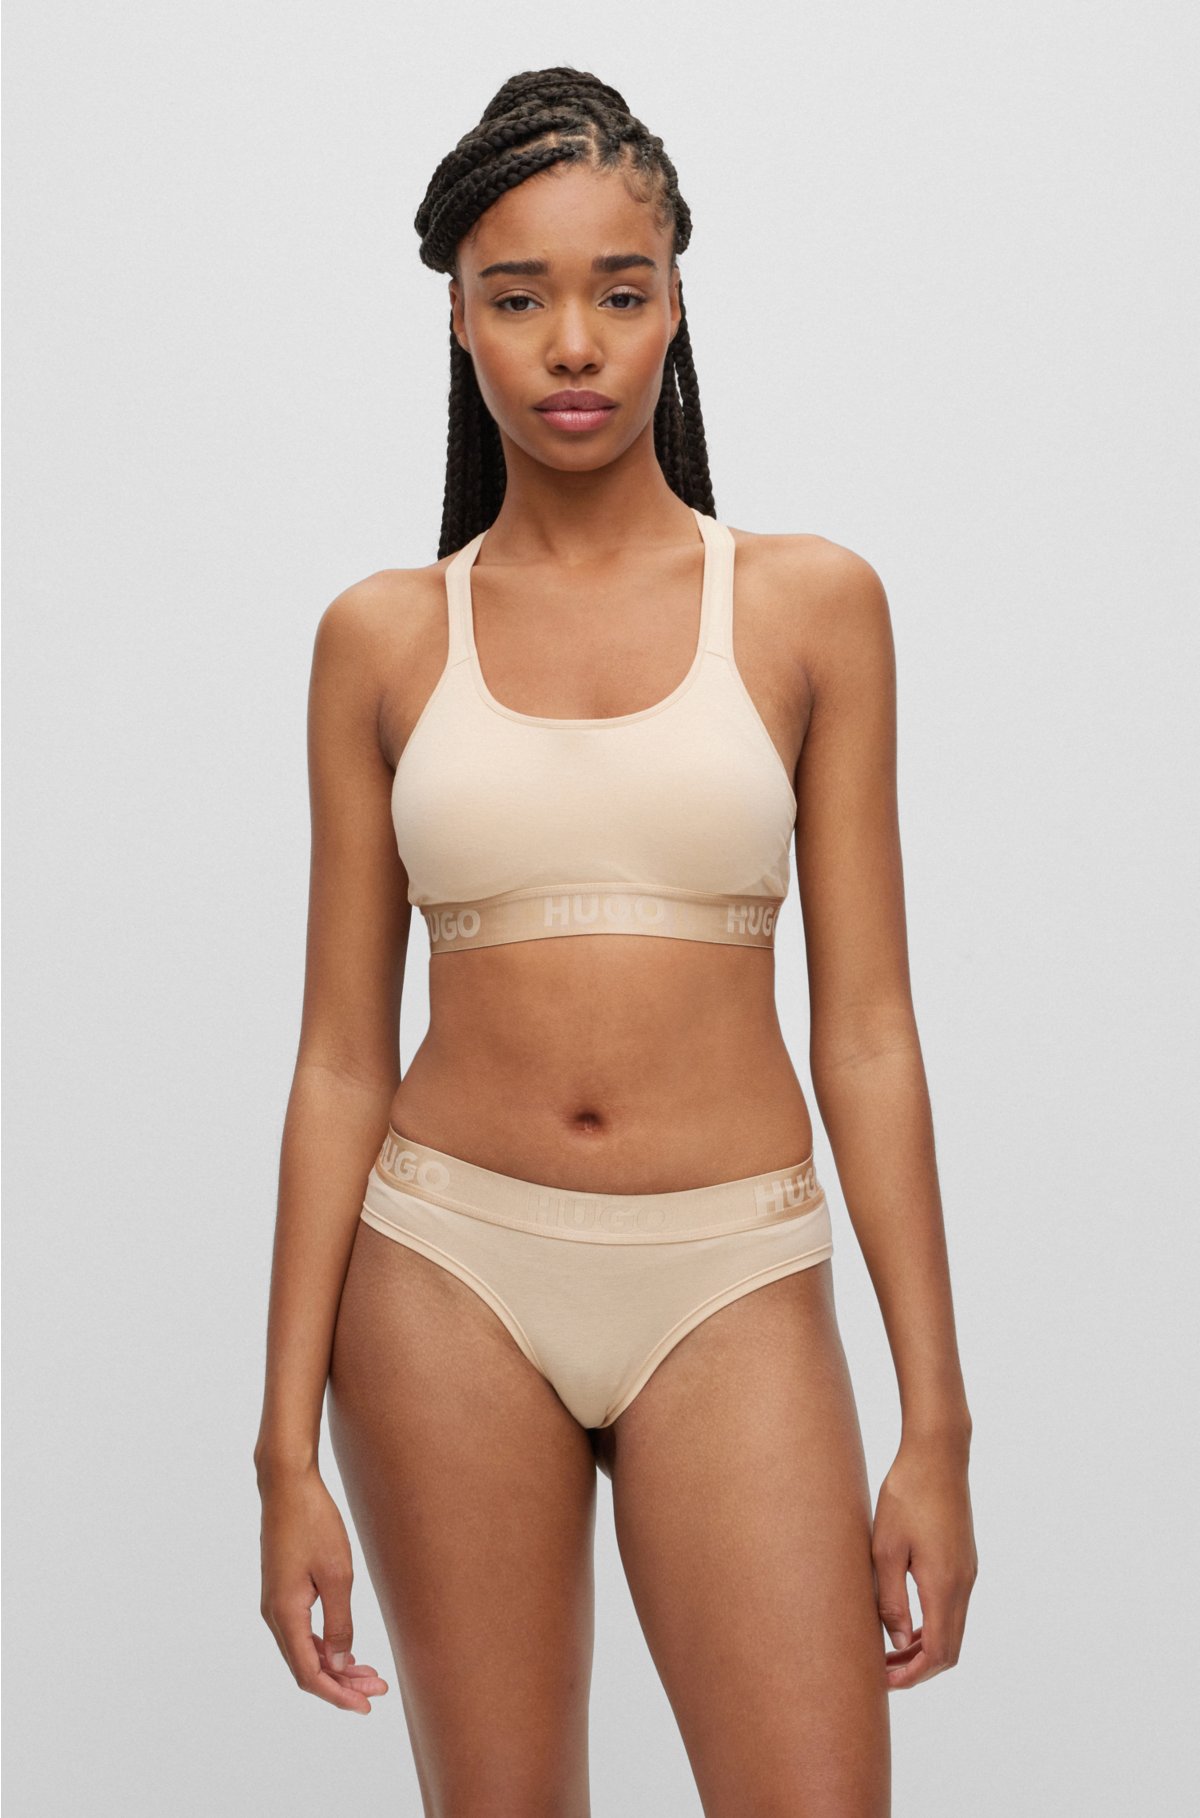 HUGO - Bralette in stretch cotton with repeat logos | Bralettes